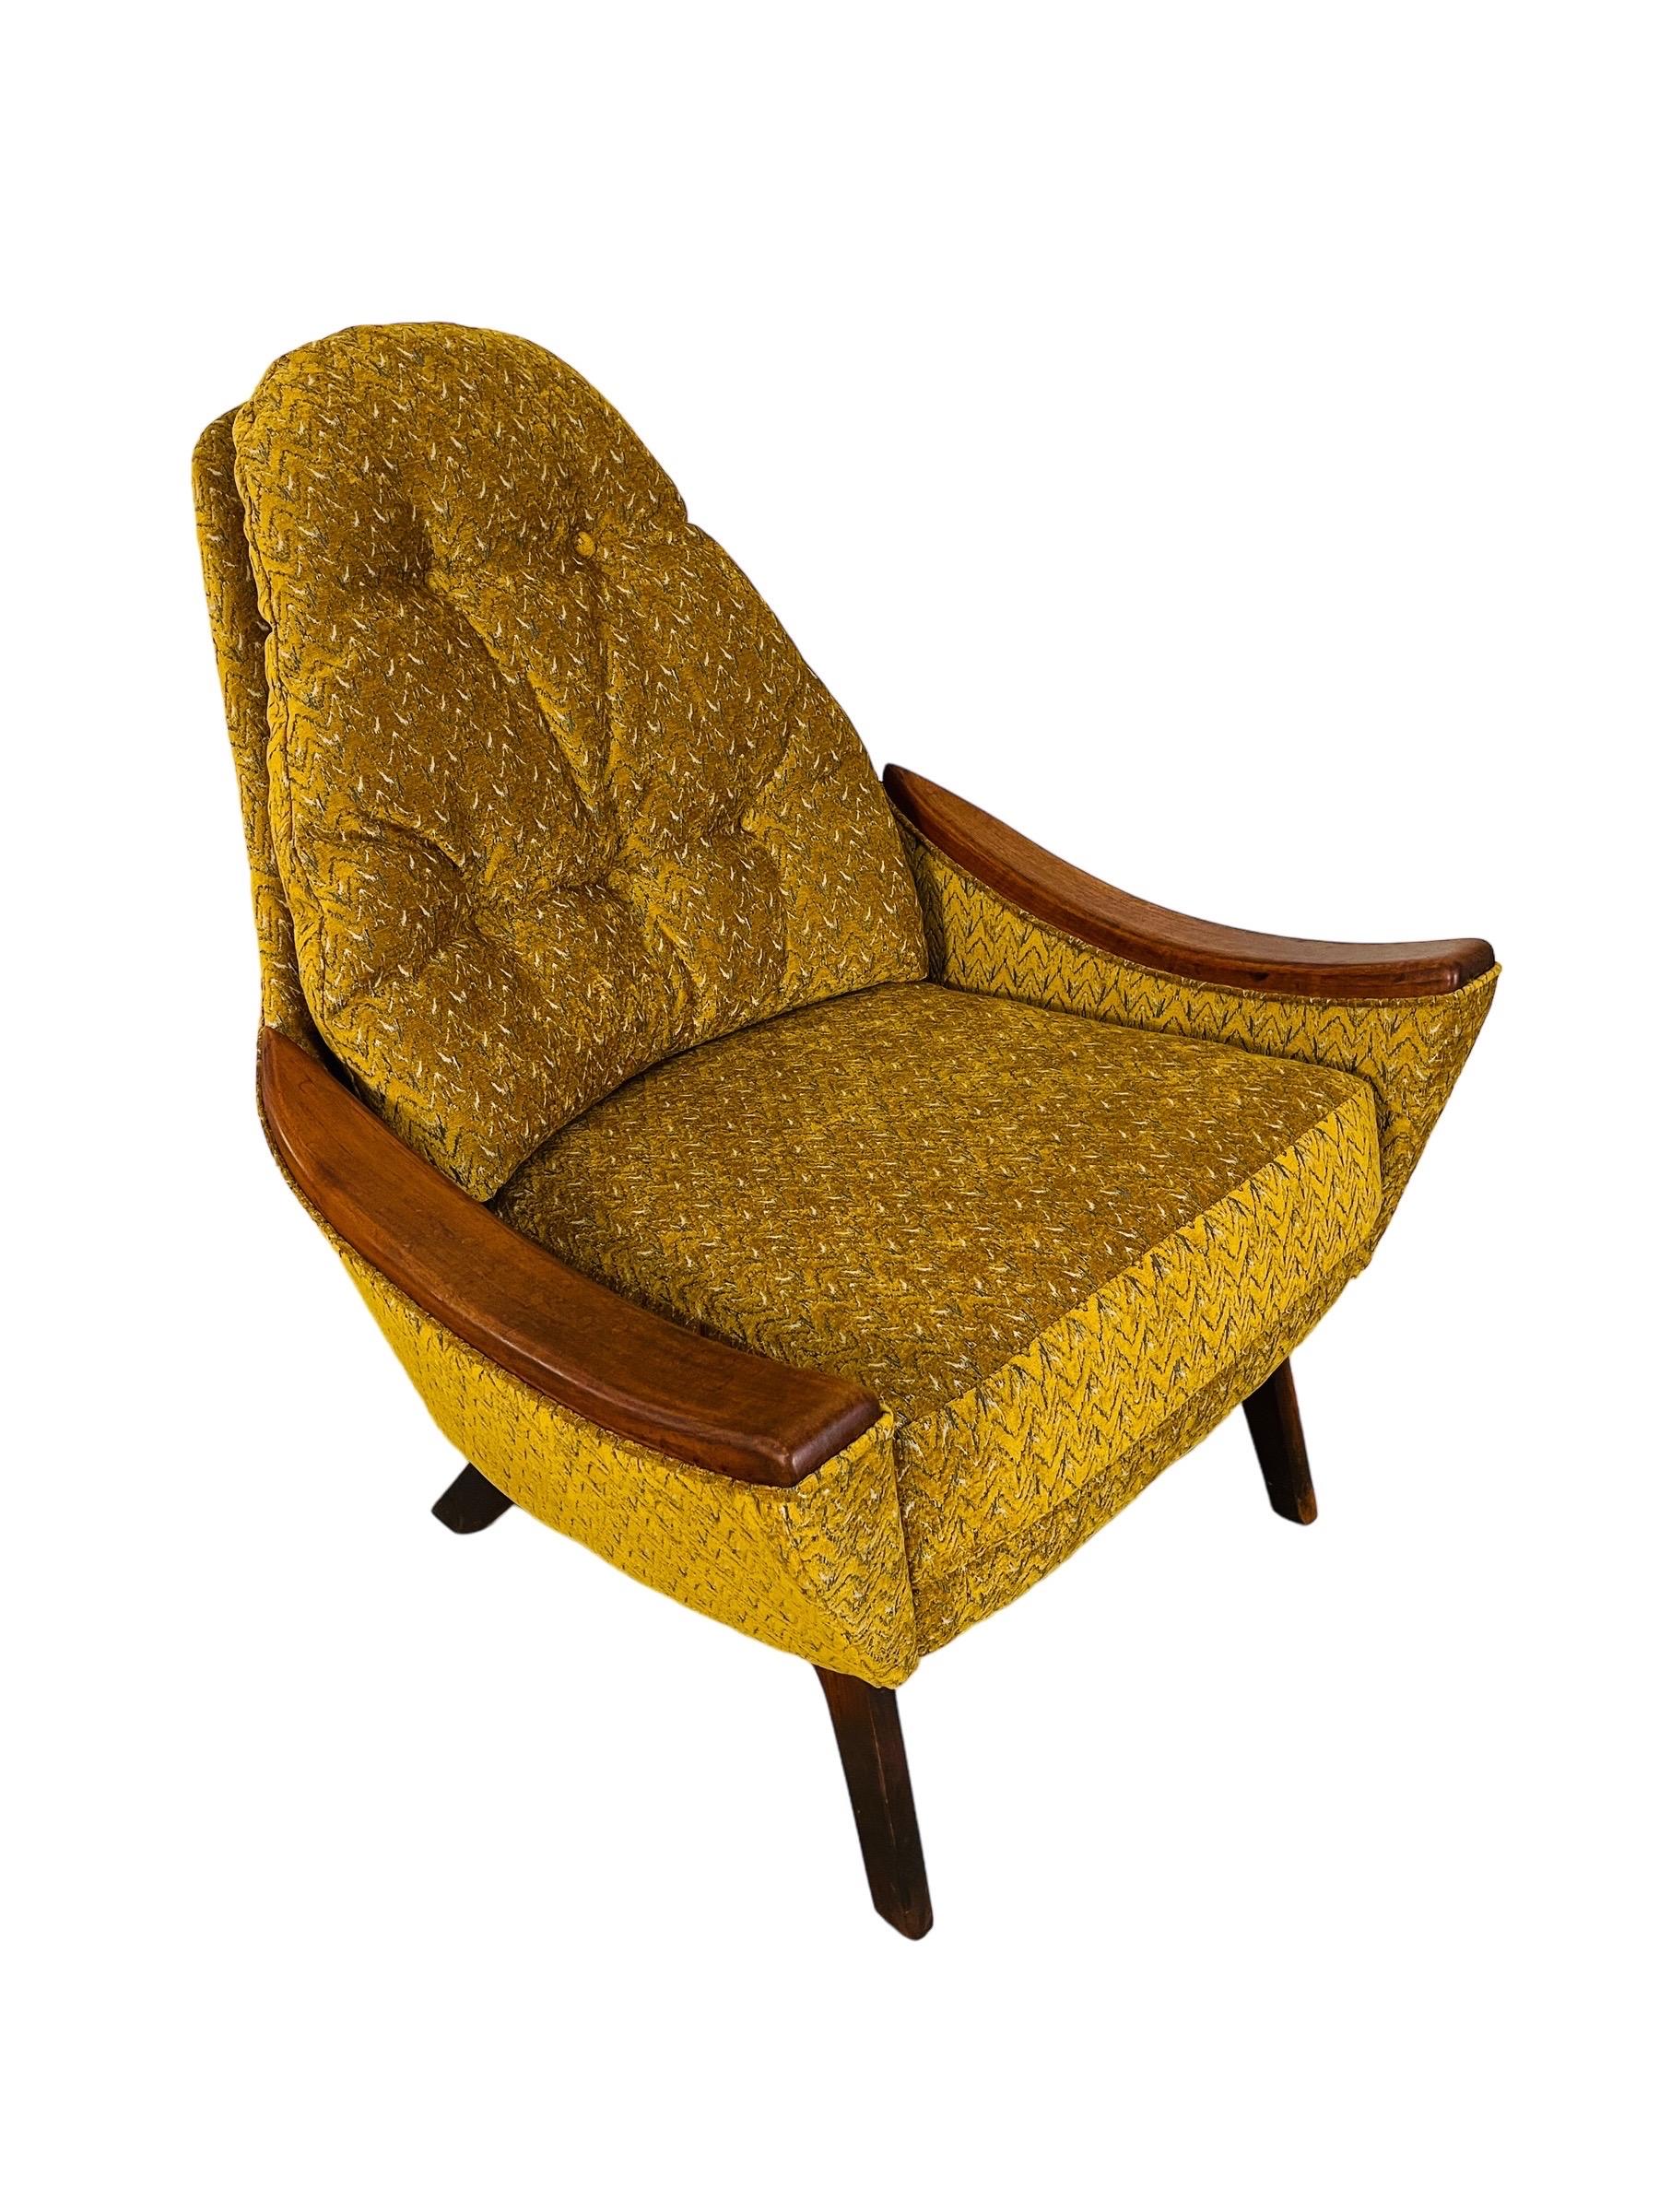 20th Century Adrian Pearsall Lounge Chair For Sale